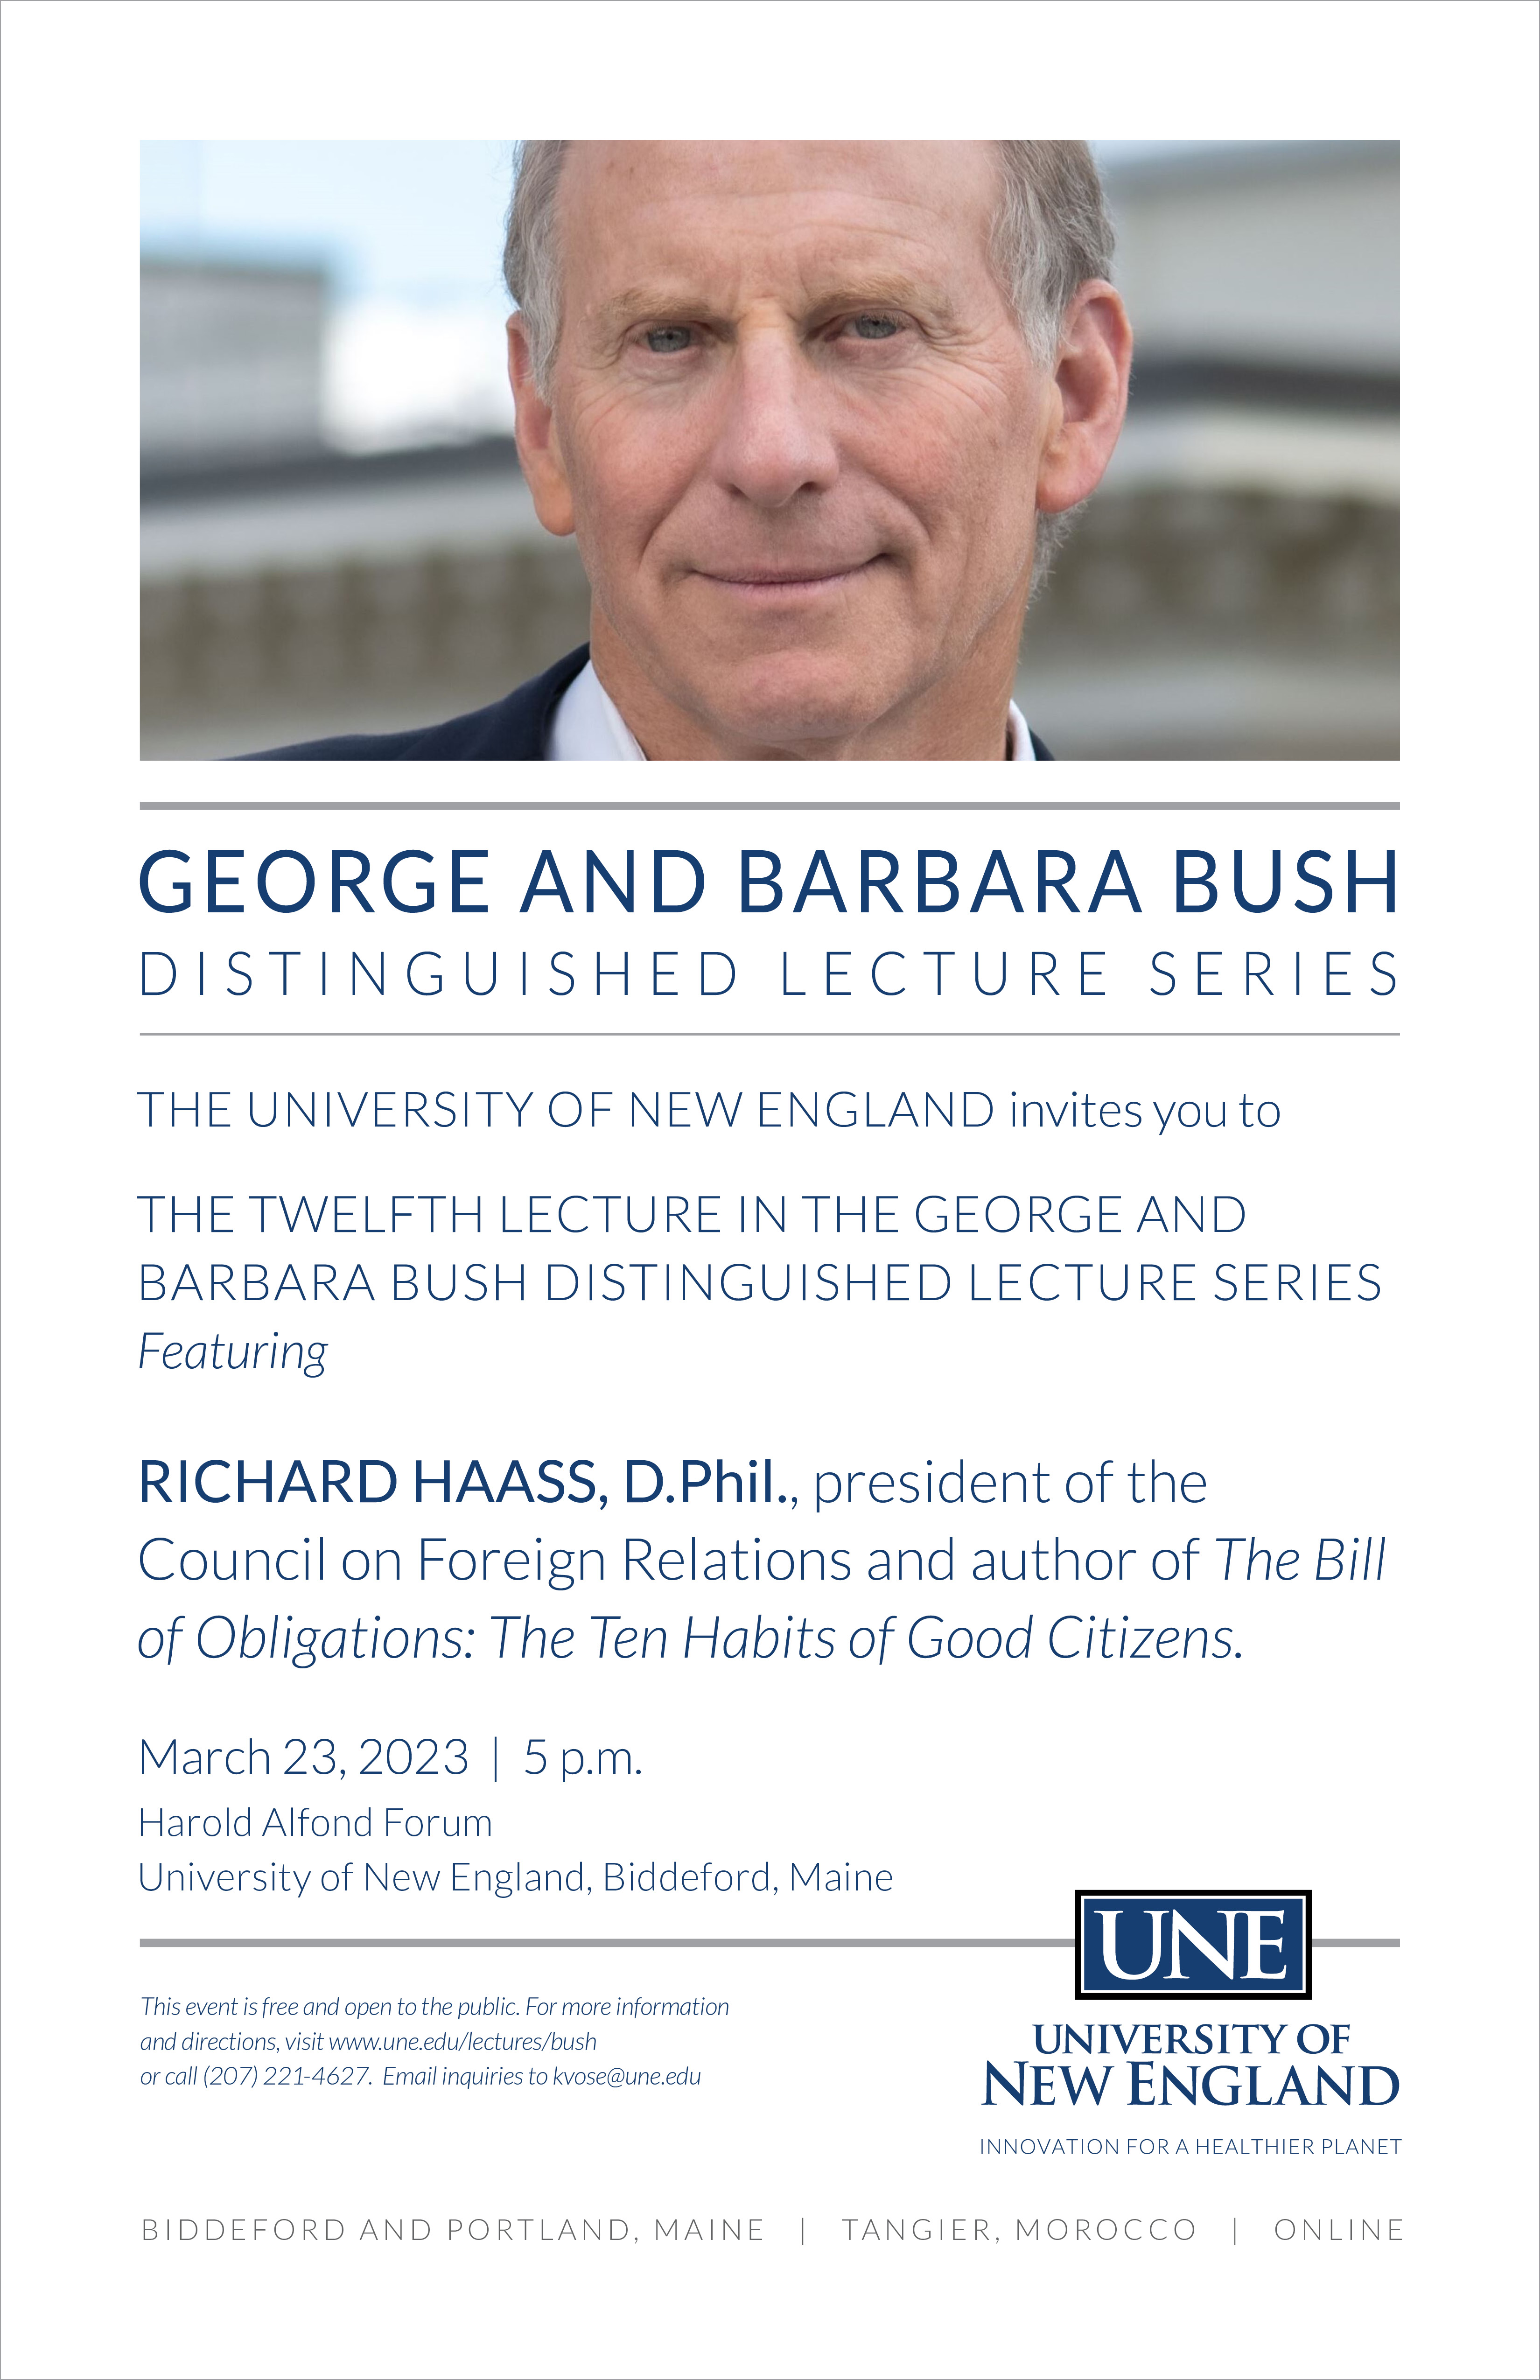 Poster for the 12th annual lecture in the George and Barbara Bush Distinguished lecture series